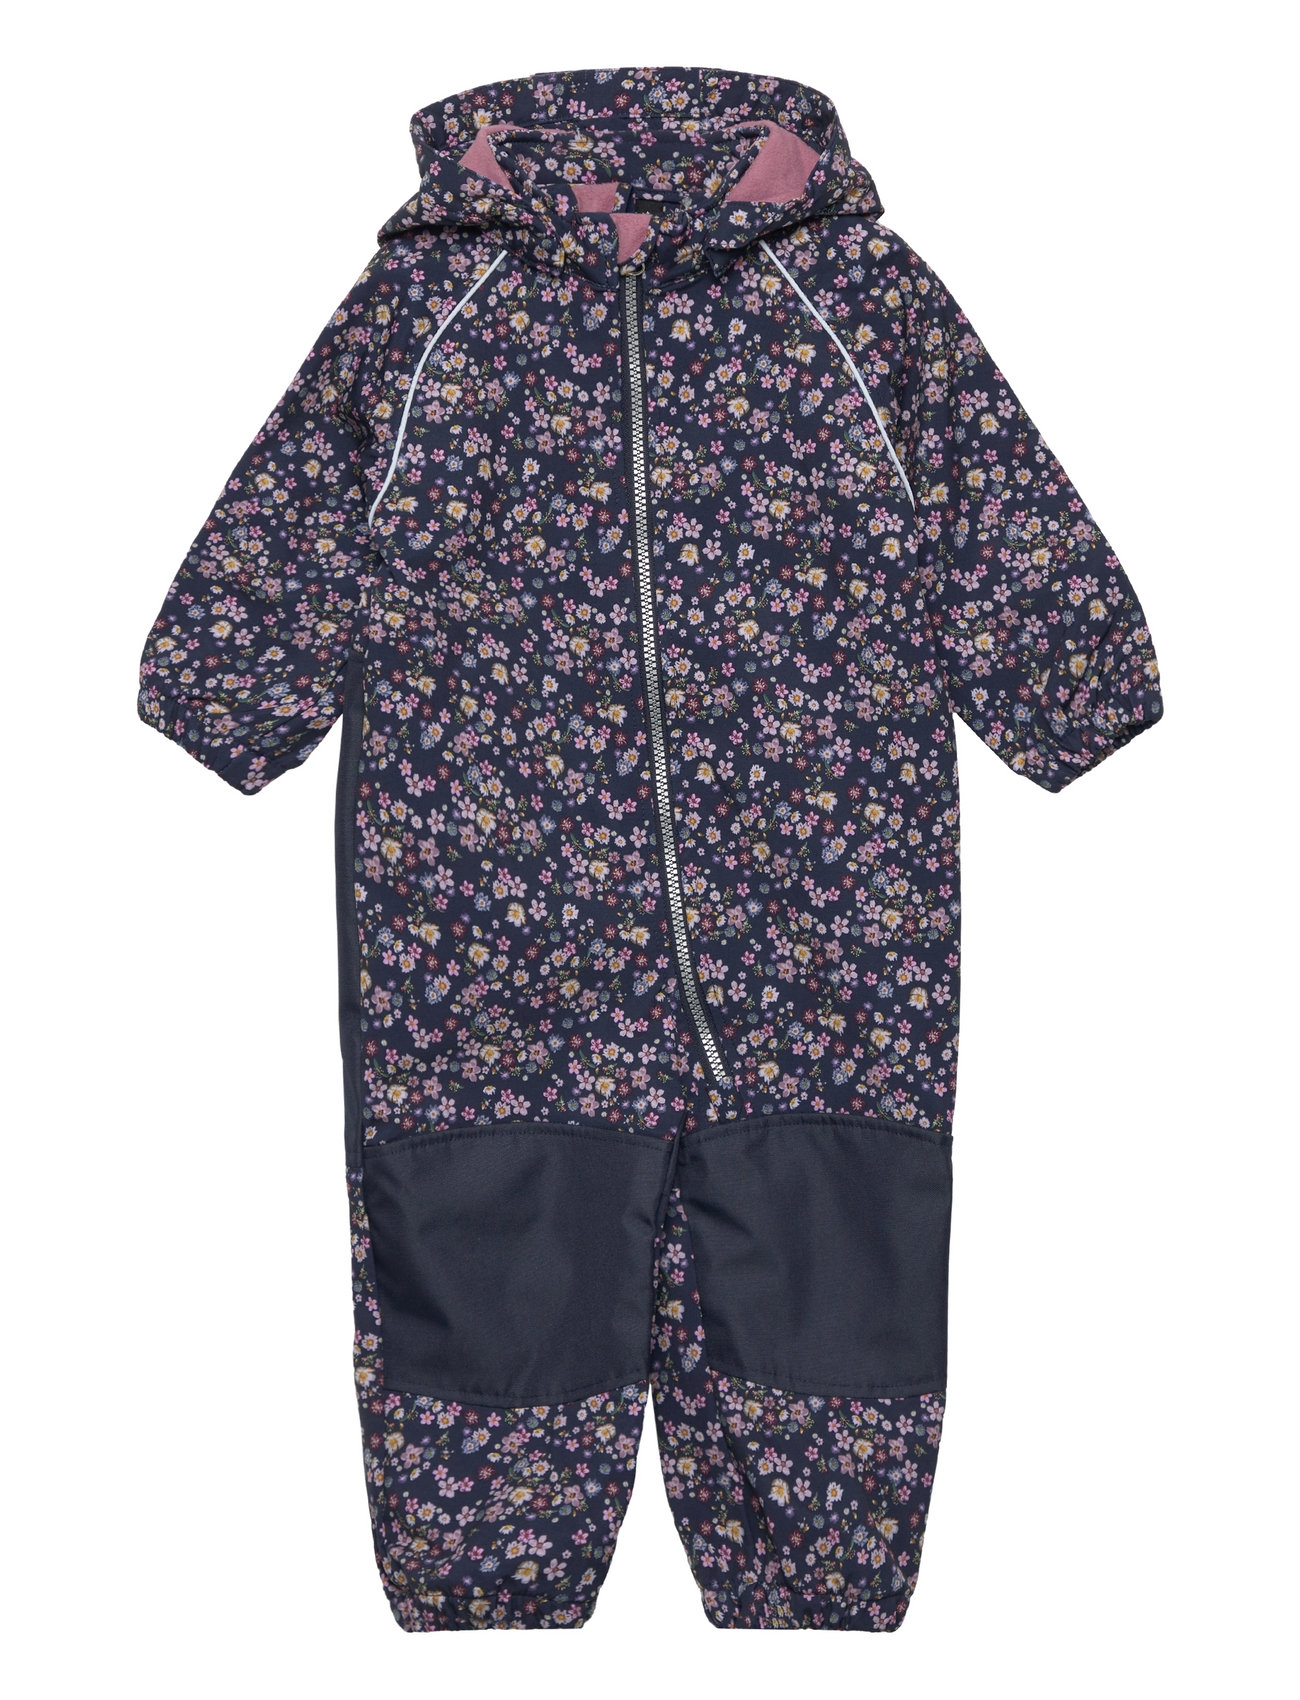 name it Nmfalfa08 Suit returns Flower Boozt.com. - €. Fast Buy online at Liberty easy and from name 28.50 delivery Coveralls it Fo